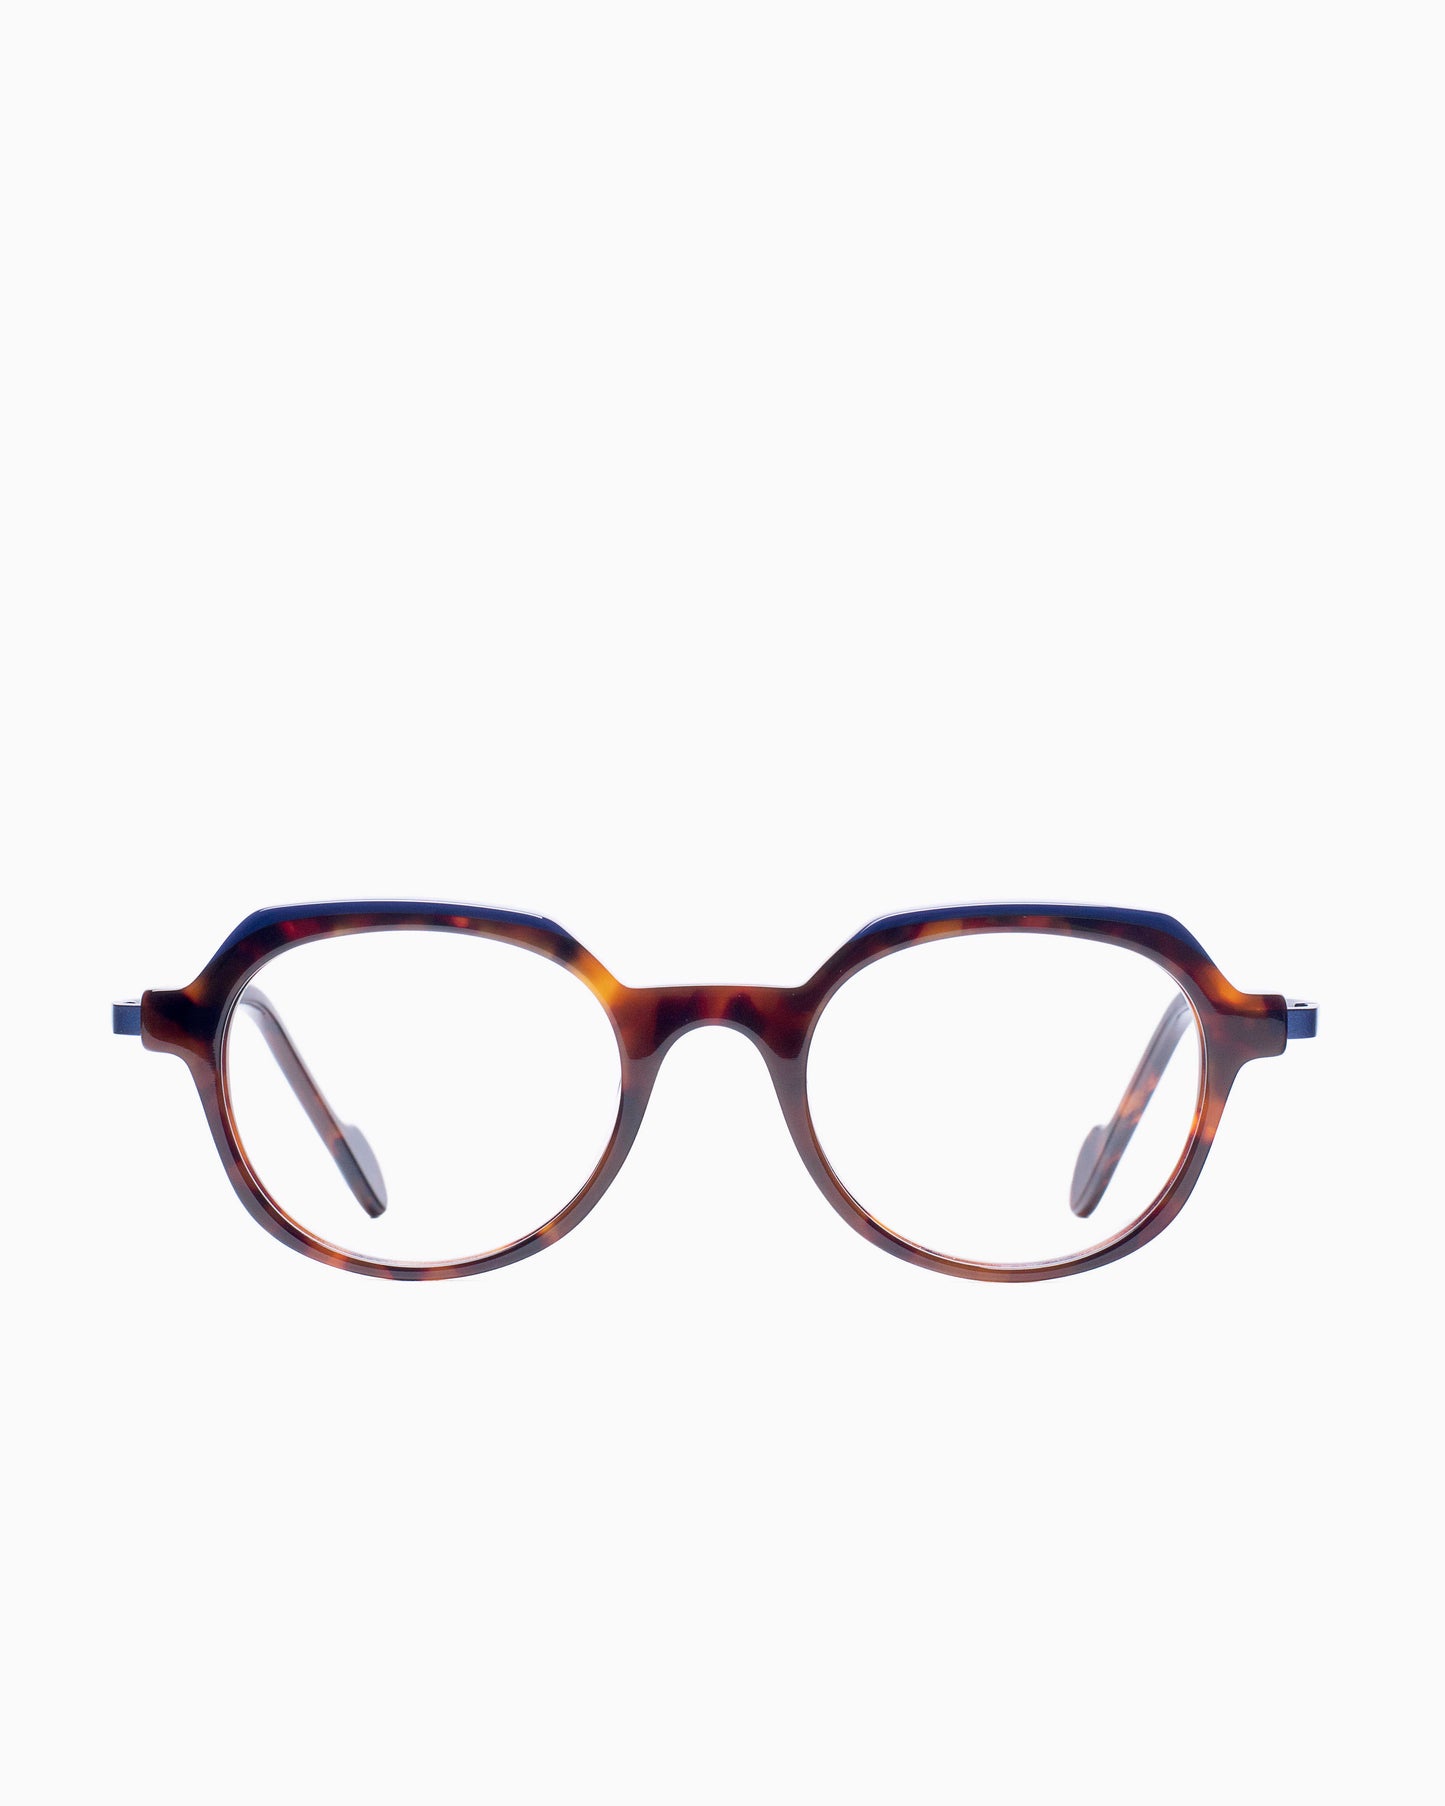 Nao Ned - Gwillen - 7007 | glasses bar